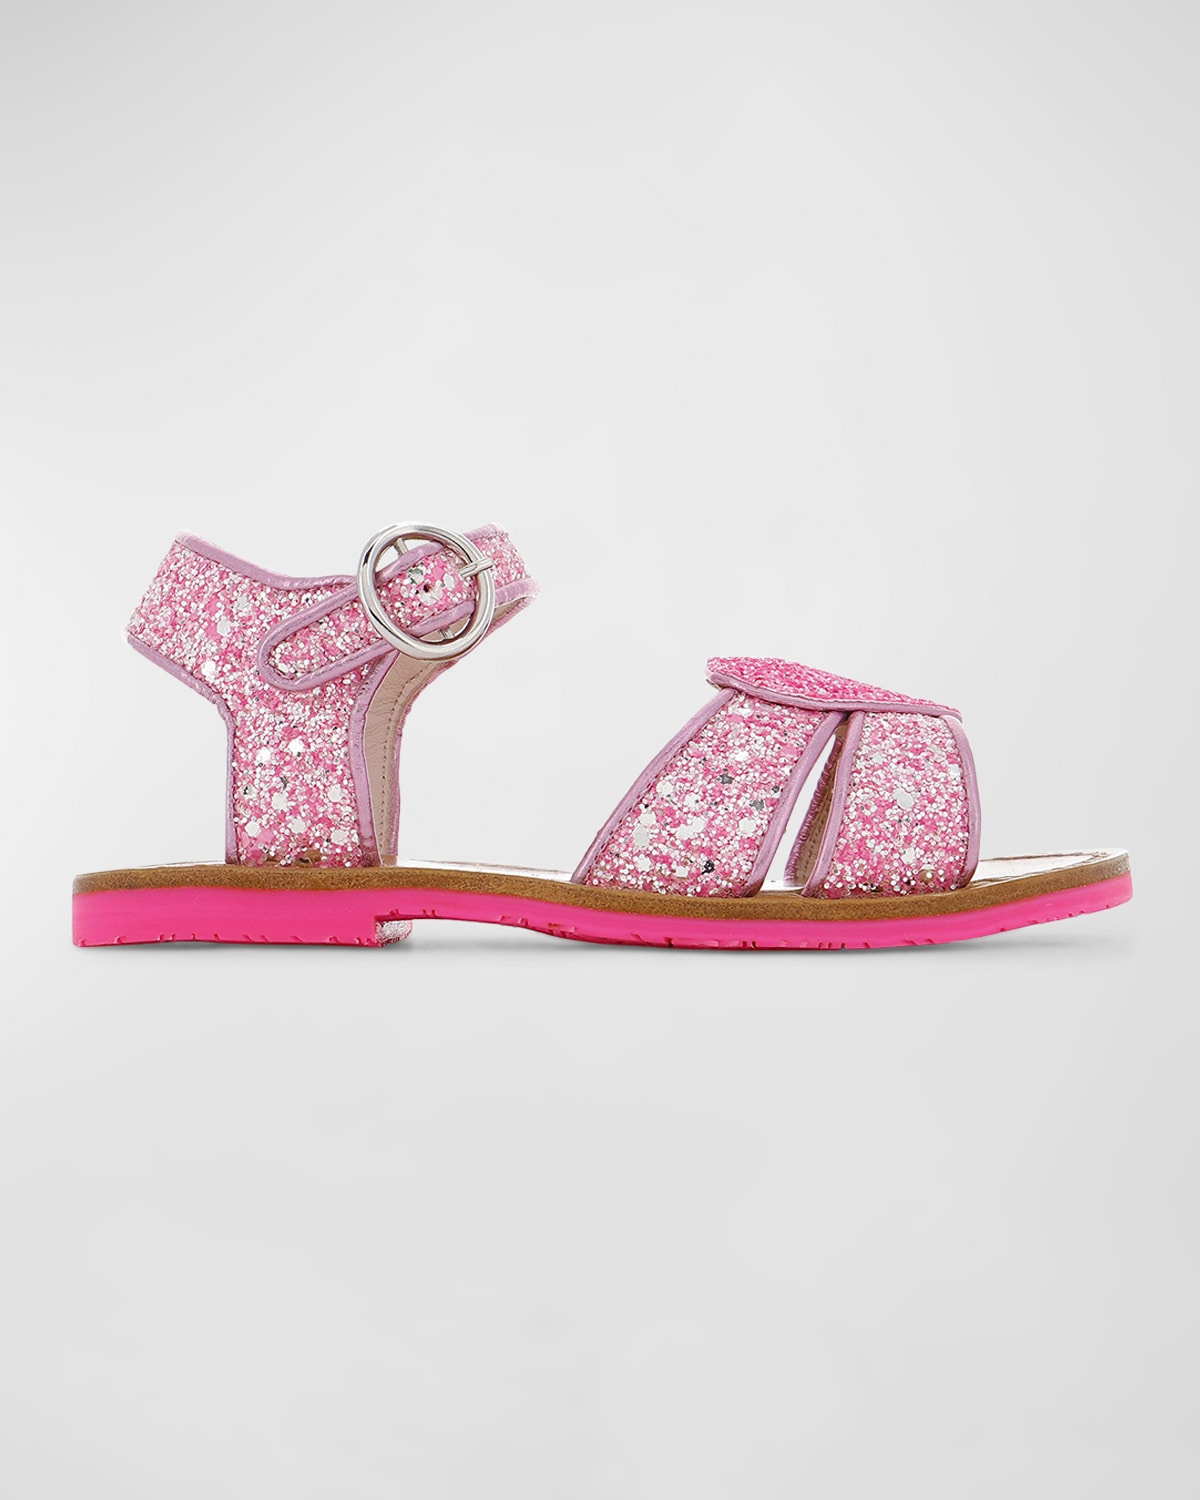 Sophia Webster Kids' Girl's Amora Heart Glitter Sandals, Baby/toddlers In Pink Punch Cryst